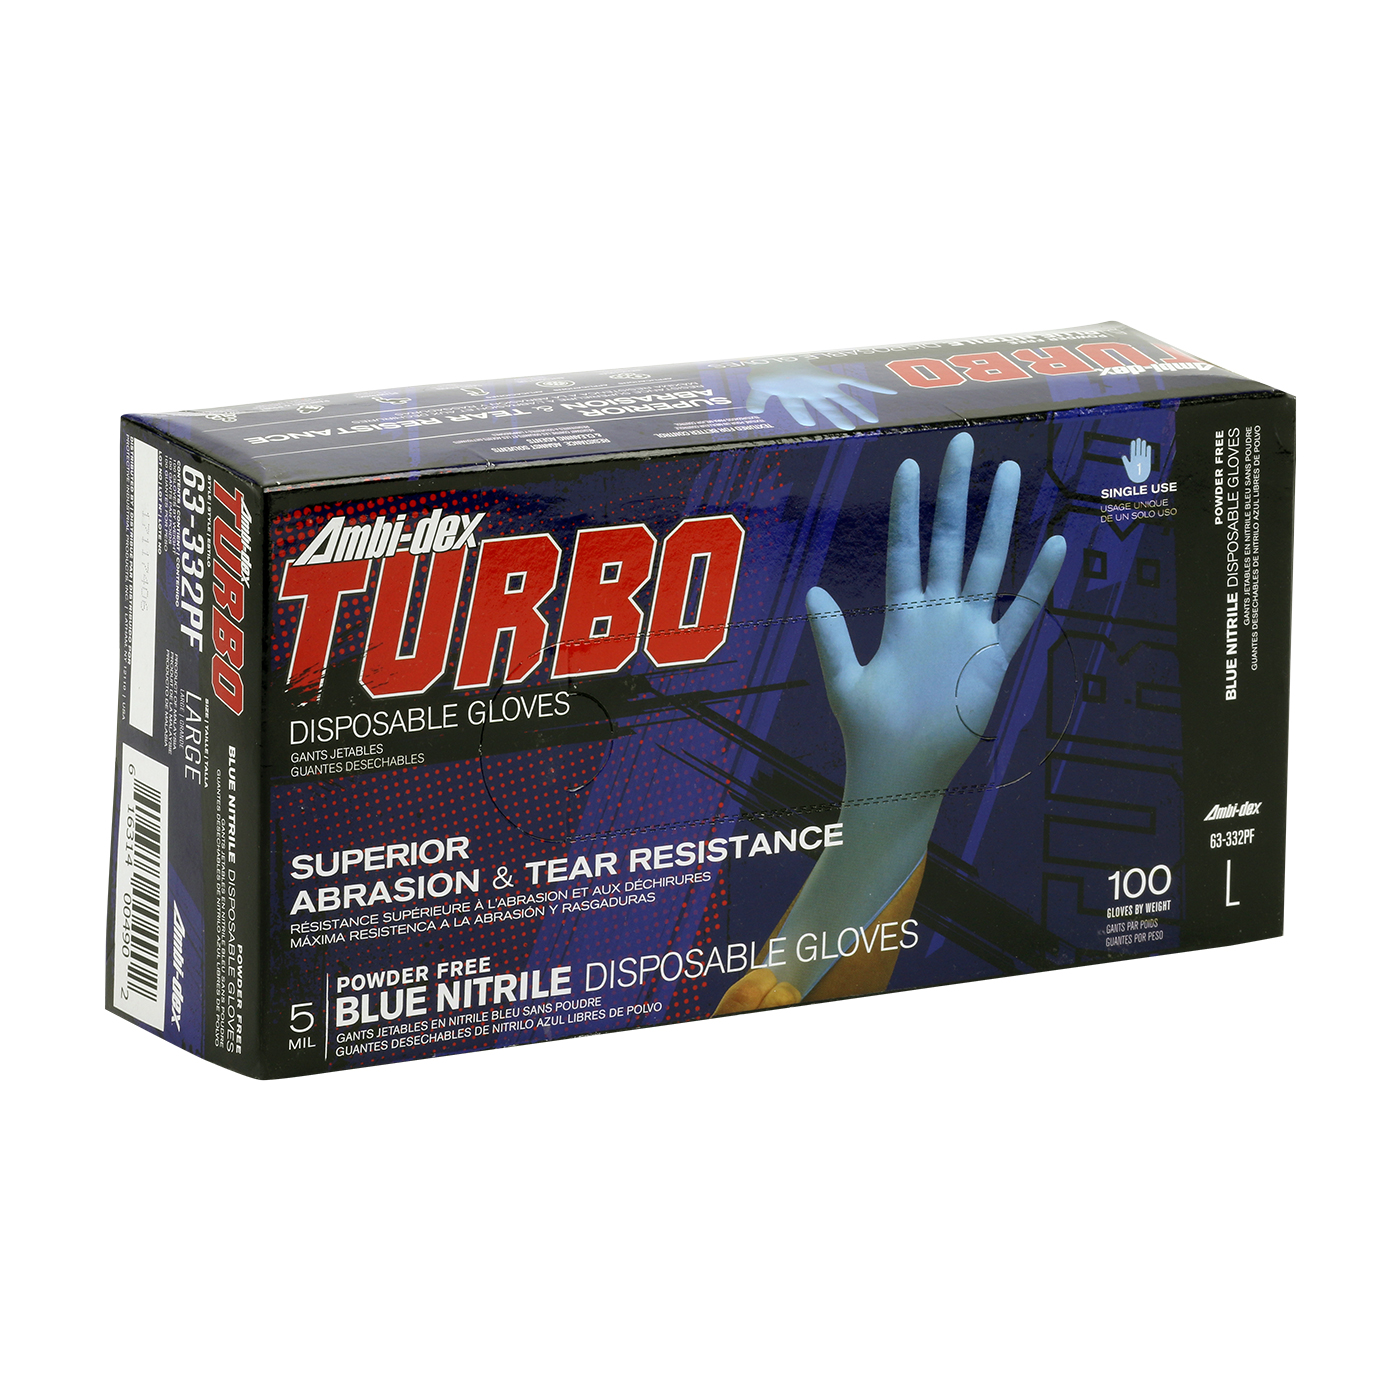 #63-332PF PIP Ambi-dex® Turbo Disposable Nitrile Glove, Powder Free with Textured Grip - 5 mil